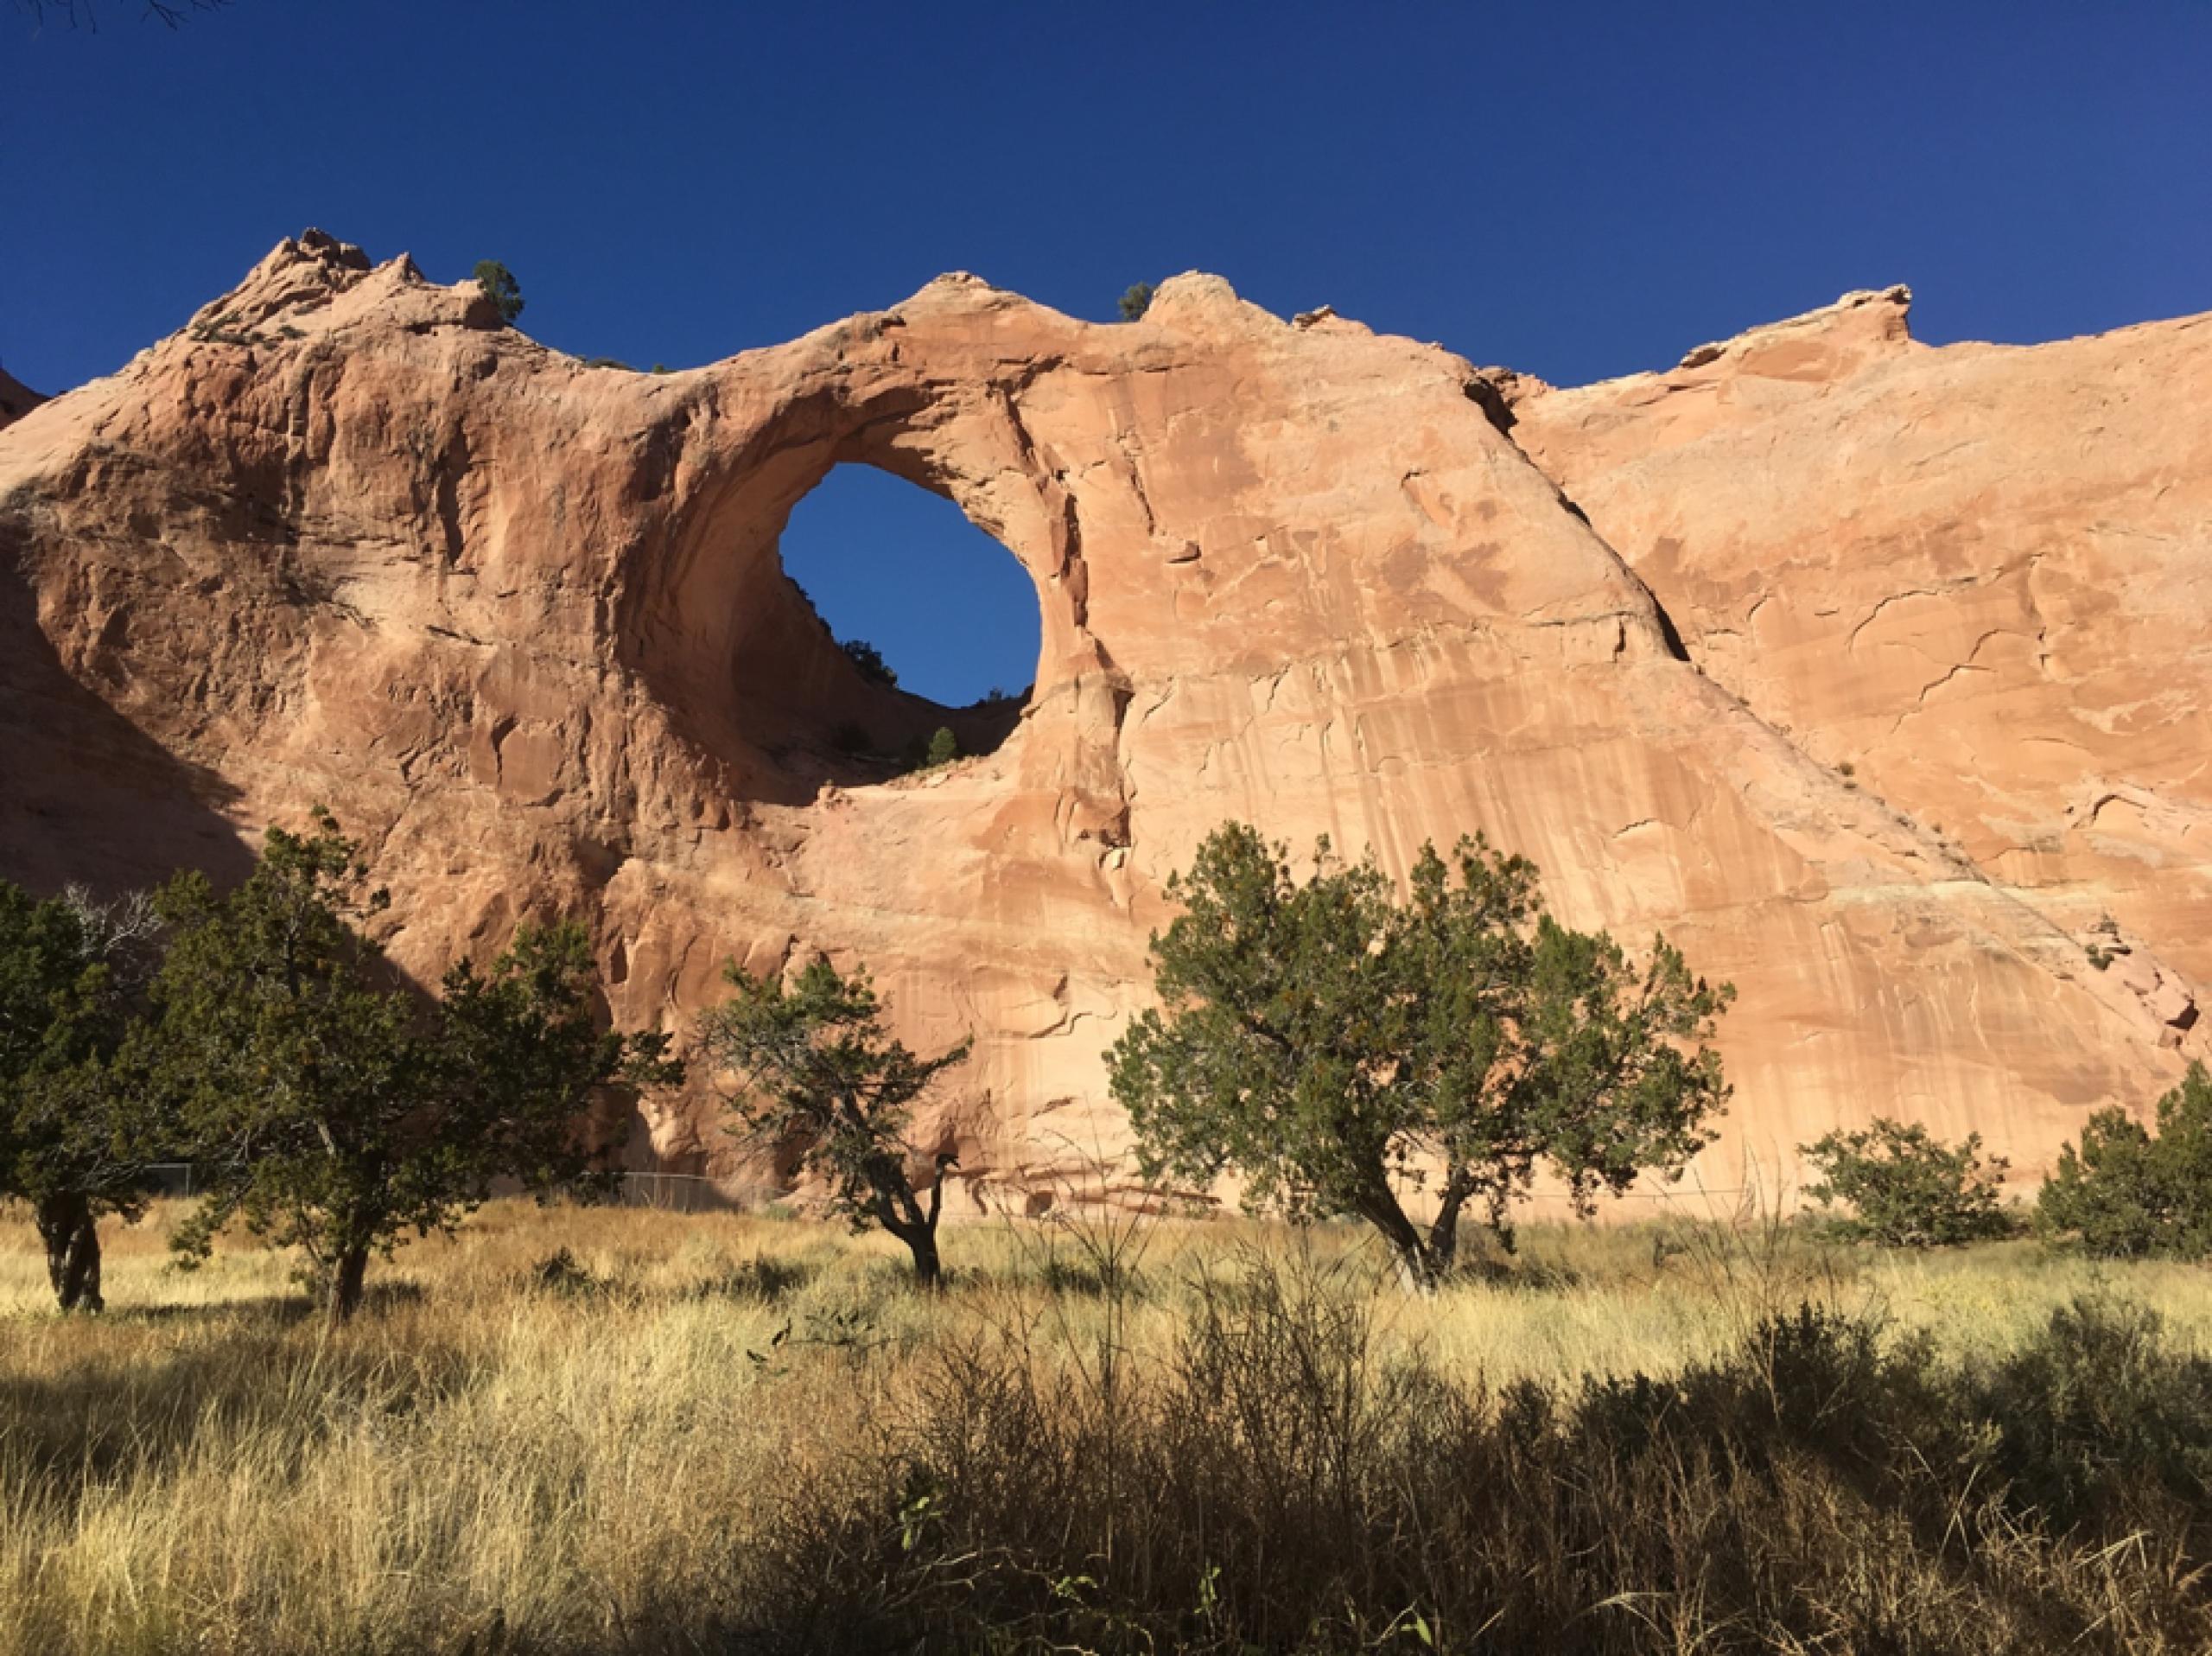 A rock formation on the Navajo Nation.